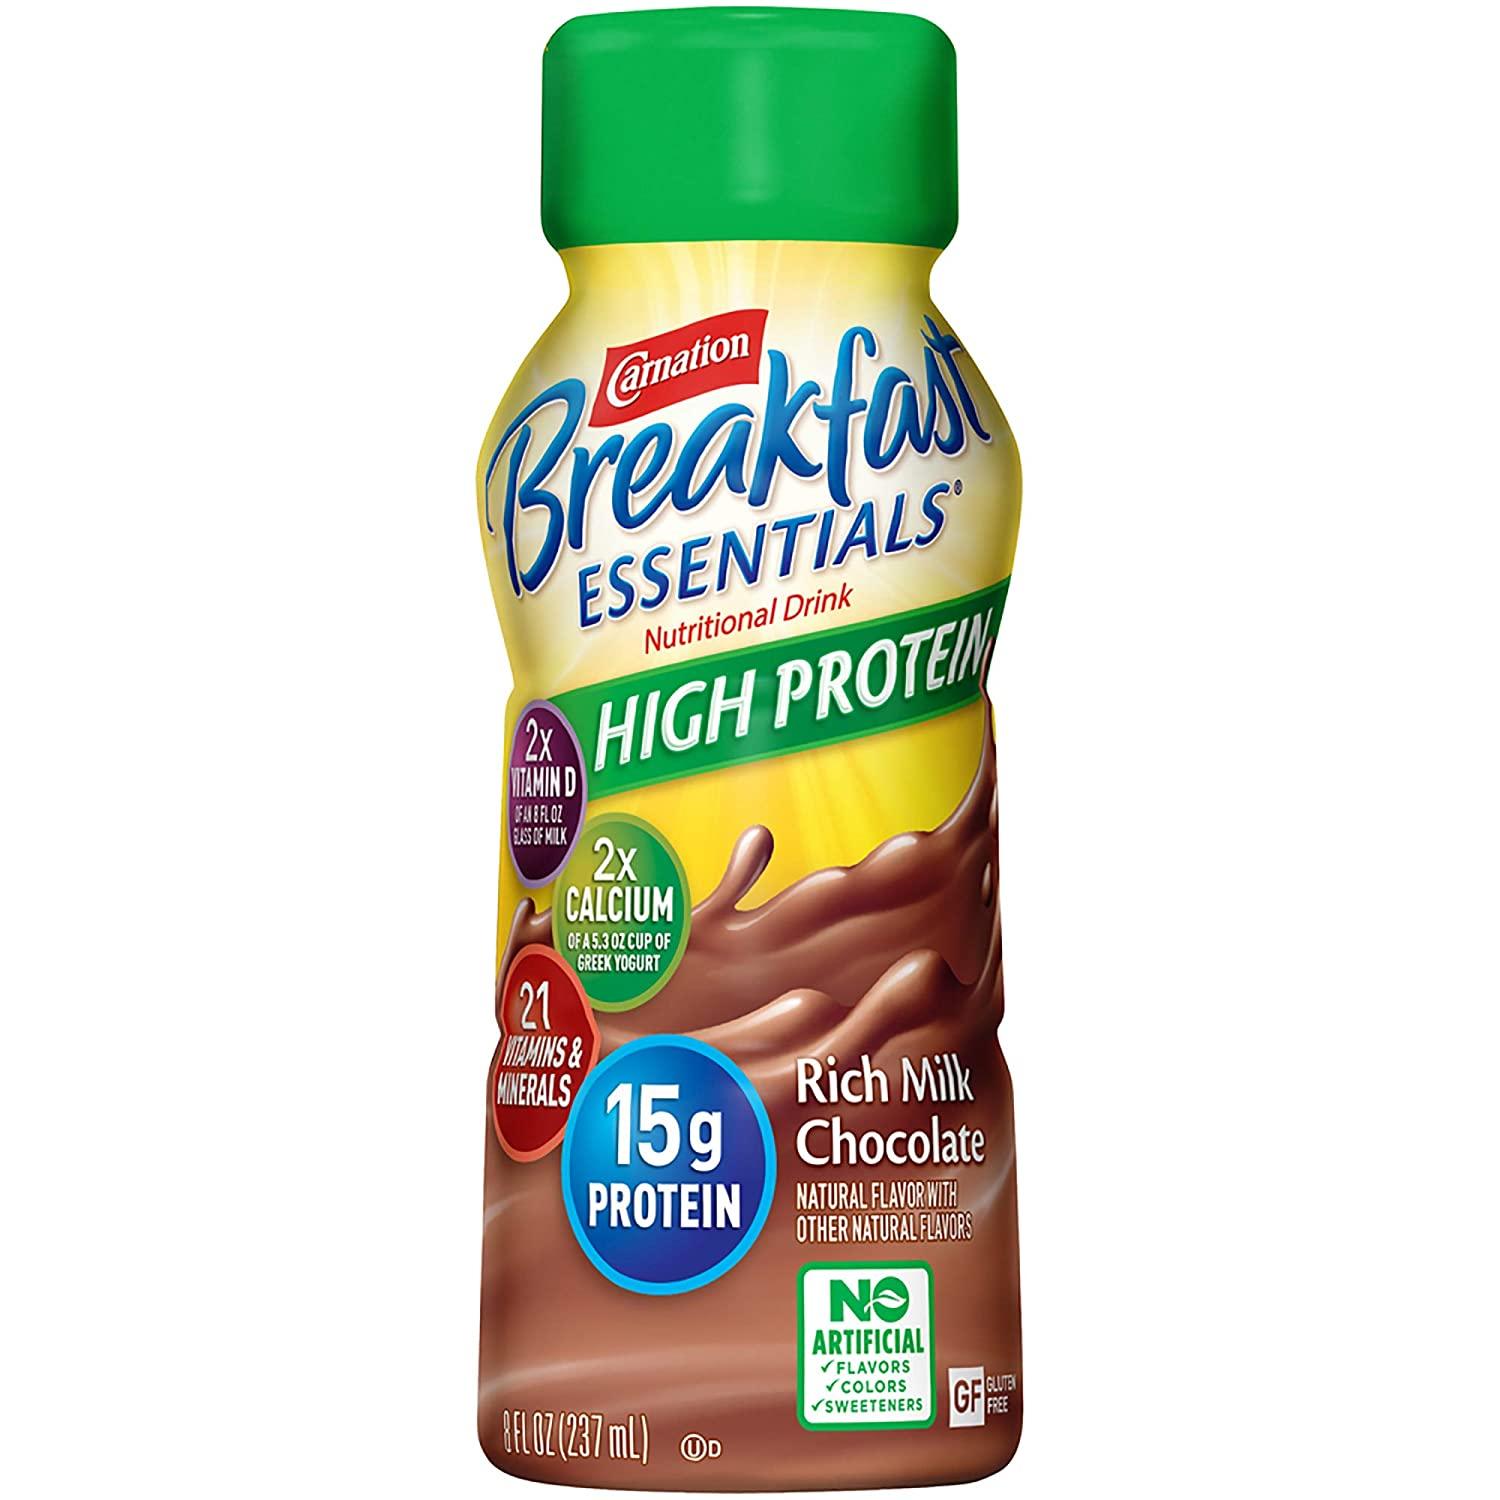 24 Carnation Breakfast Essentials High Protein Drinks for $18.51 Shipped